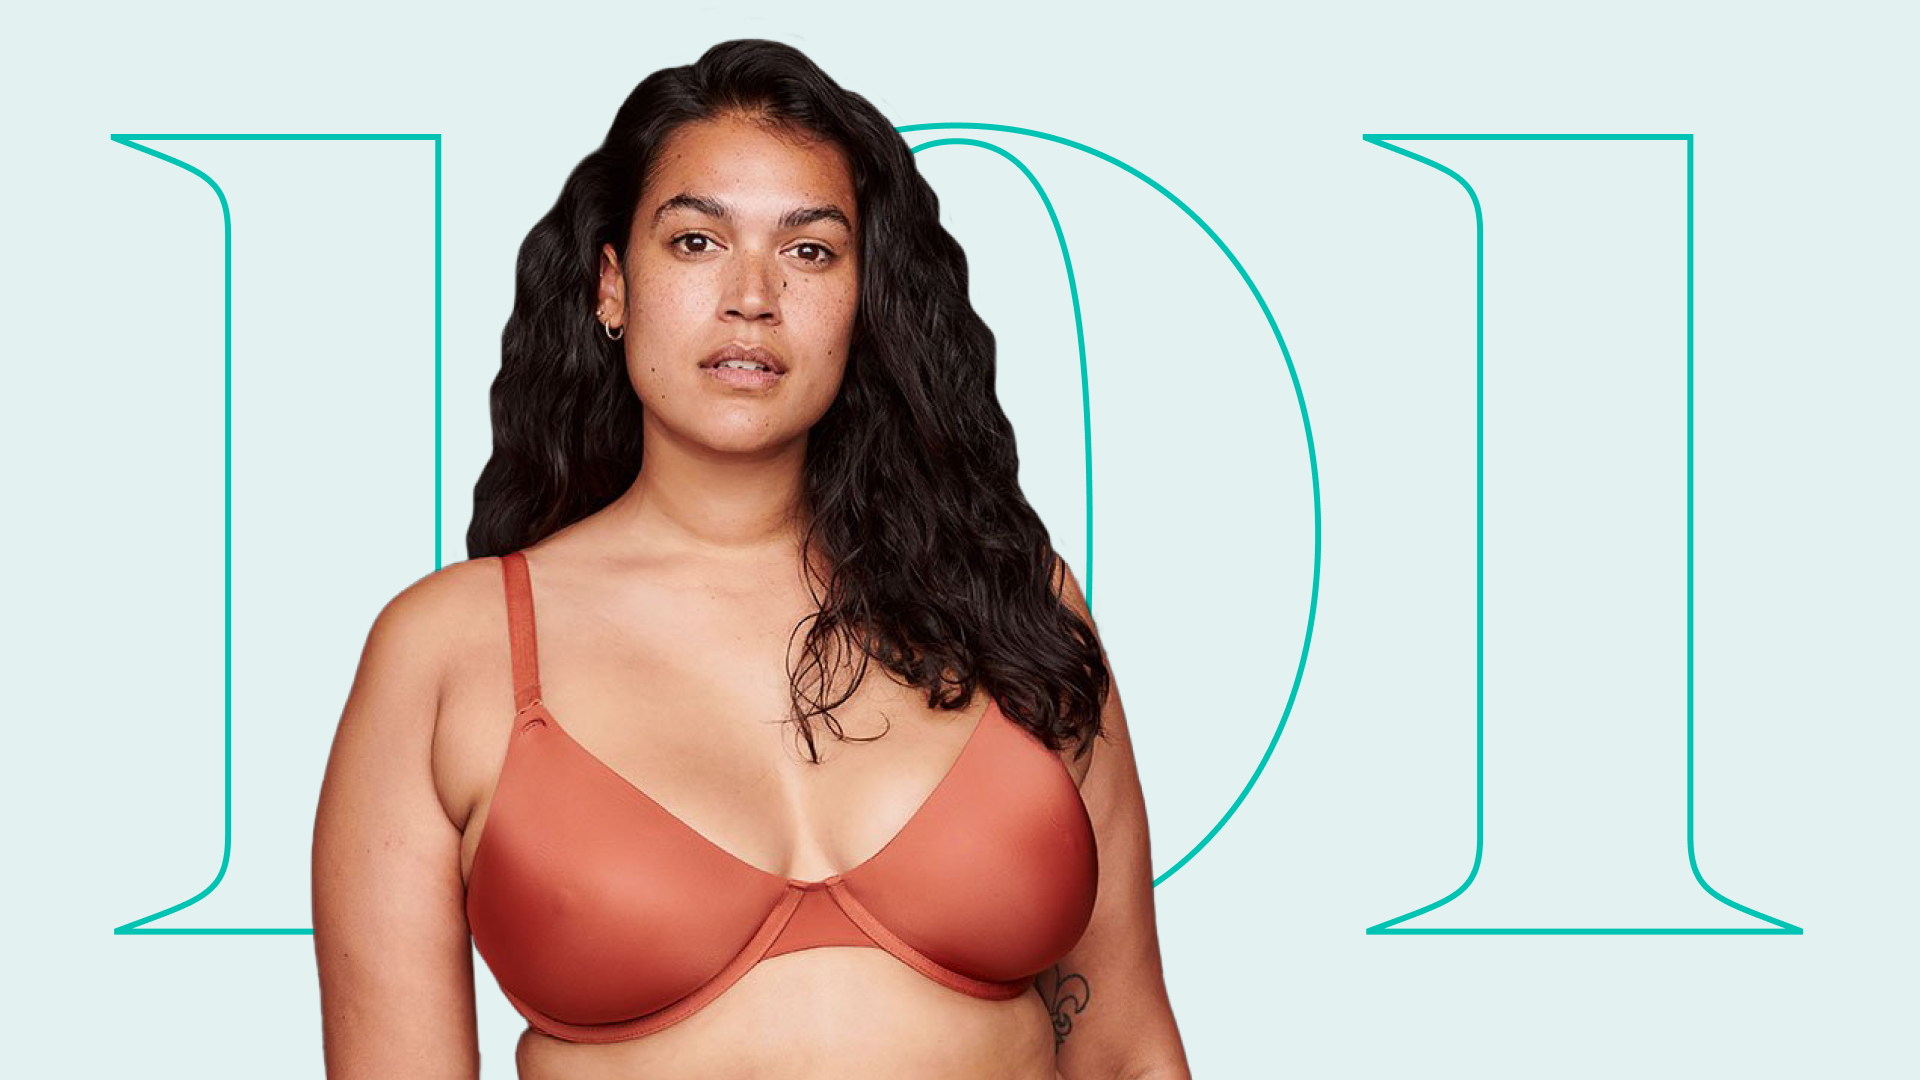 Let's talk about bras, baby.